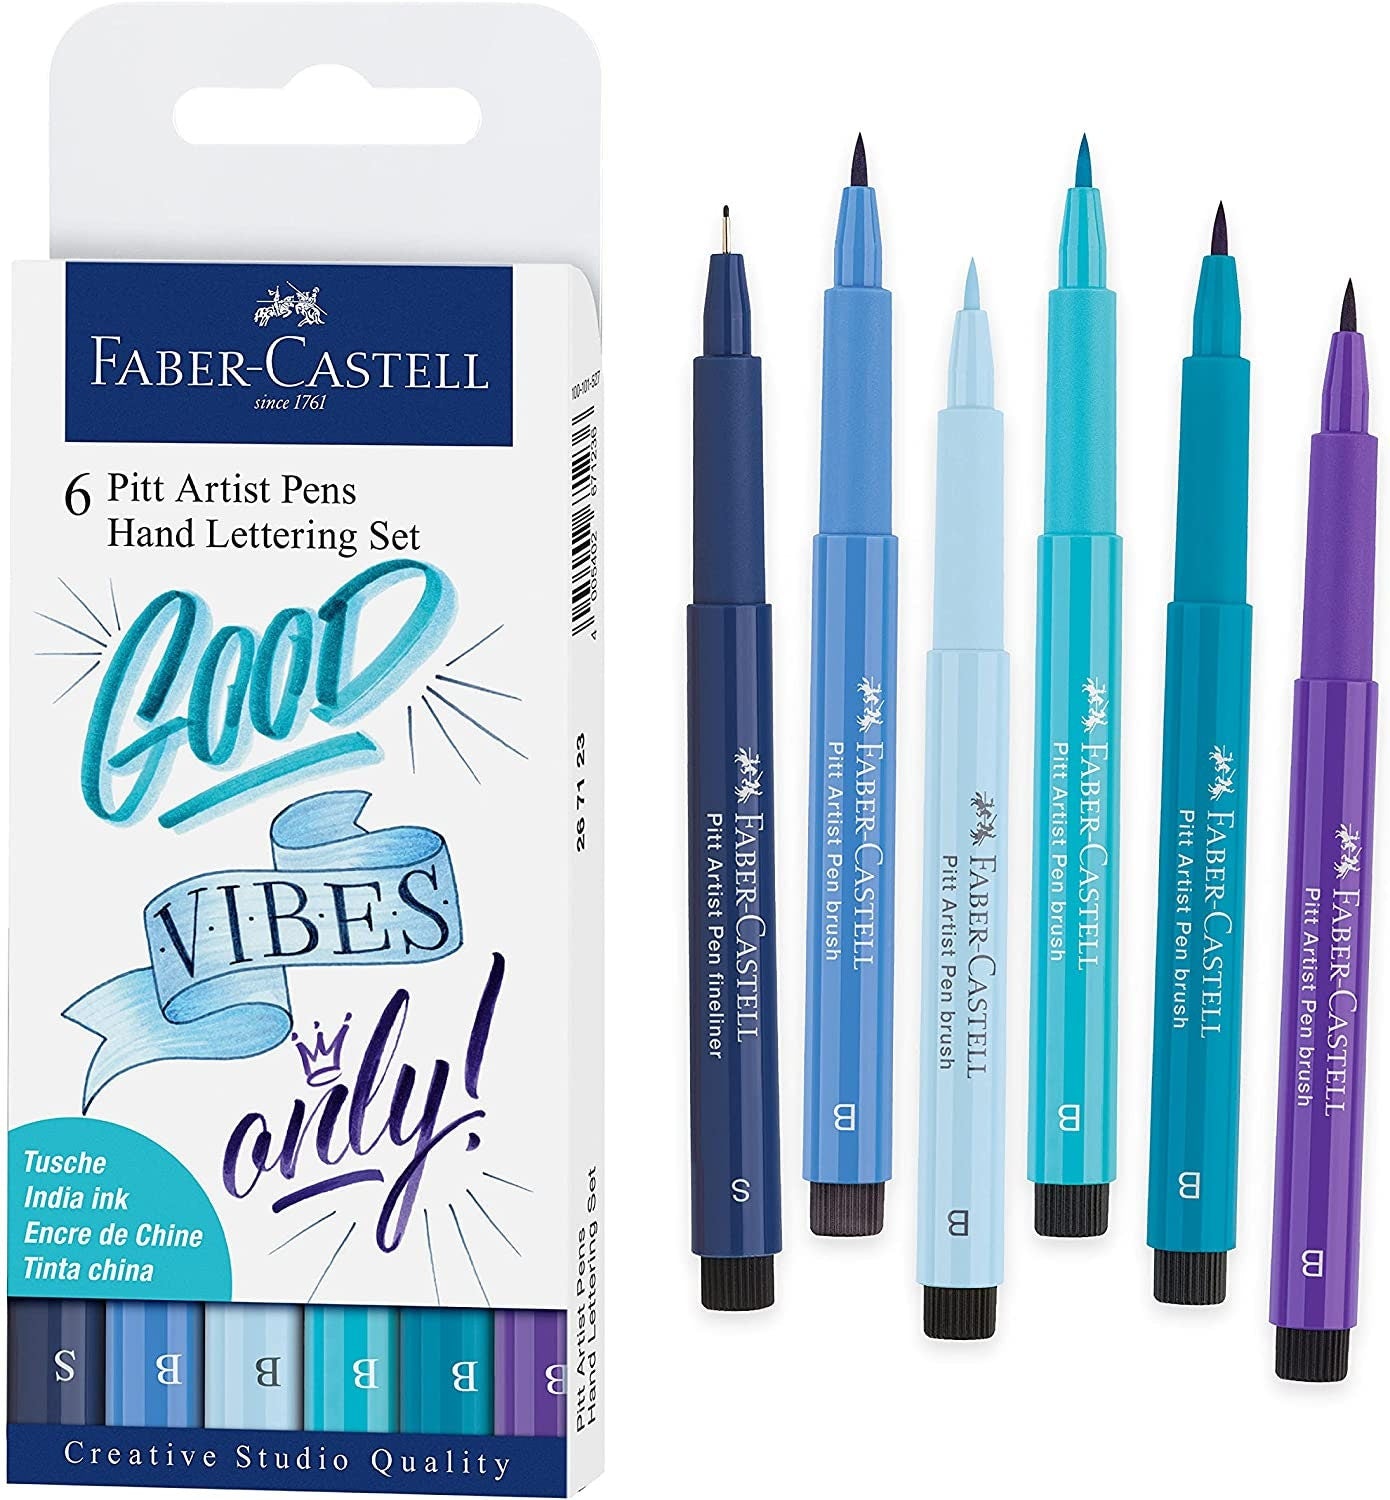 Faber-Castell Hand Lettering Calligraphy Set - Playpolis